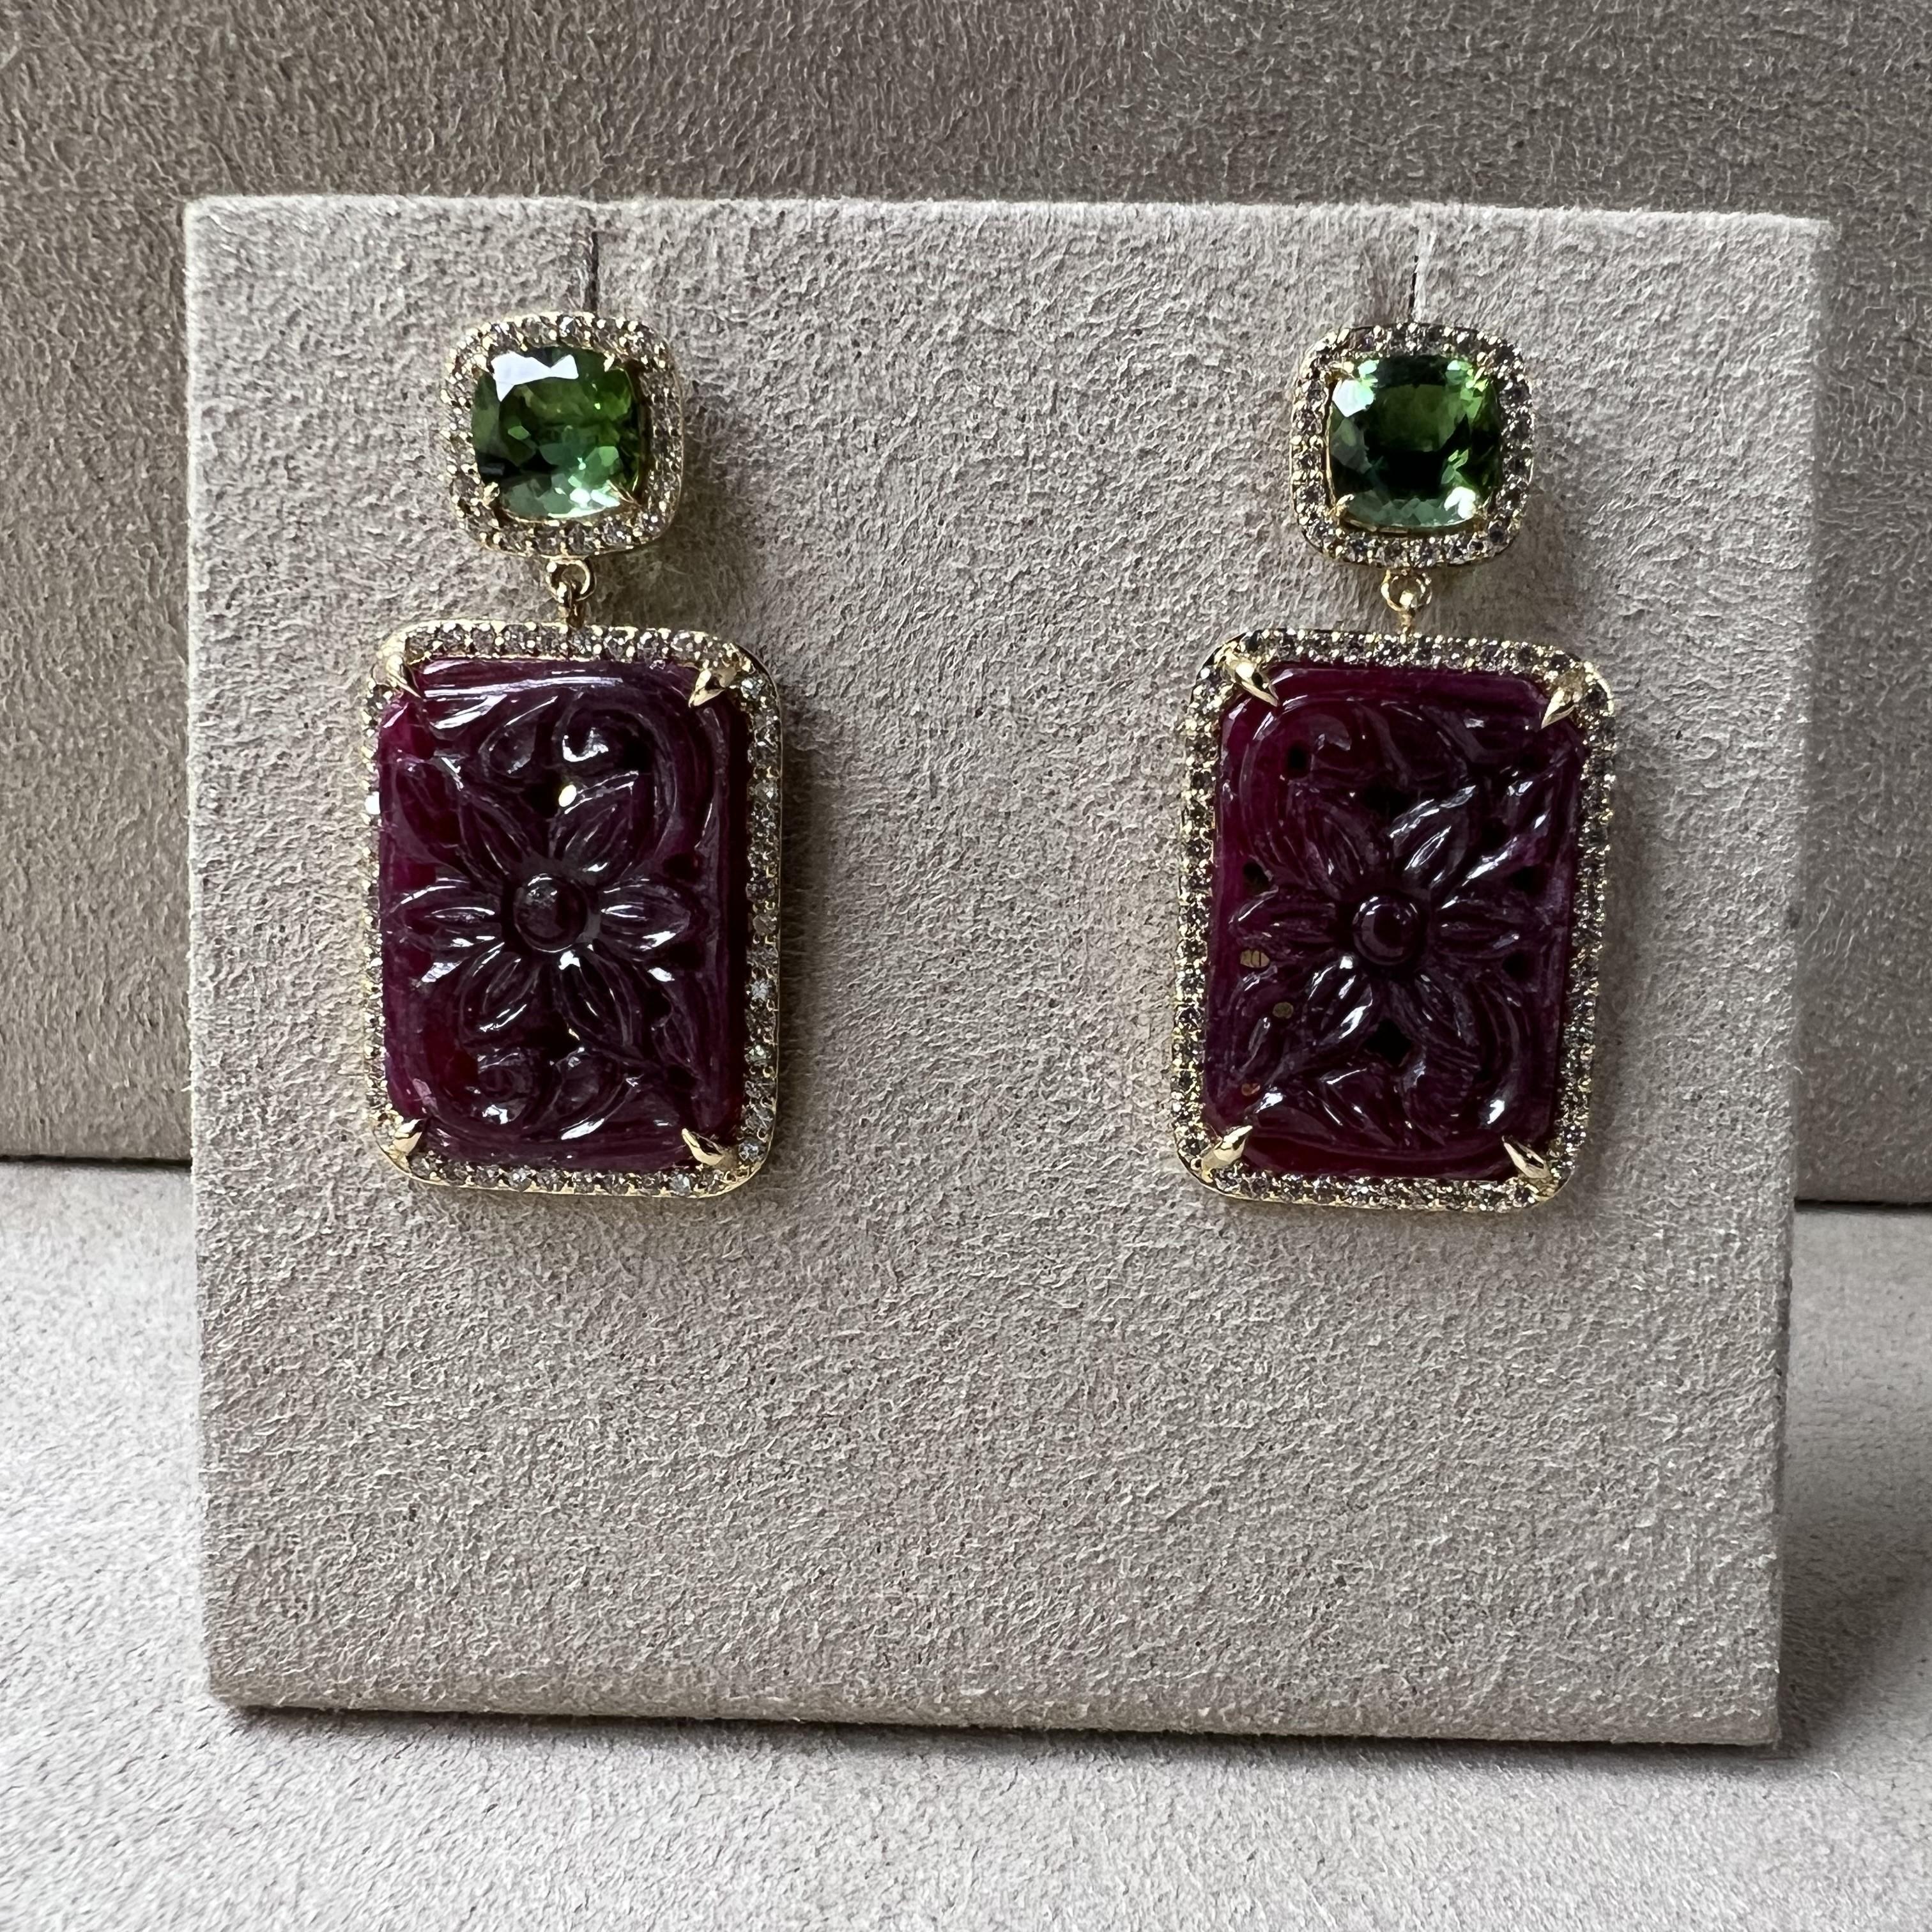 18 karat yellow gold
Green Tourmaline 3 carats approx.
Carved Rubies 23 carats approx.
Diamonds 1.10 carats approx.
18 kyg butterfly backs
Limited edition

About the Designers ~ Dharmesh & Namrata

Drawing inspiration from little things, Dharmesh &